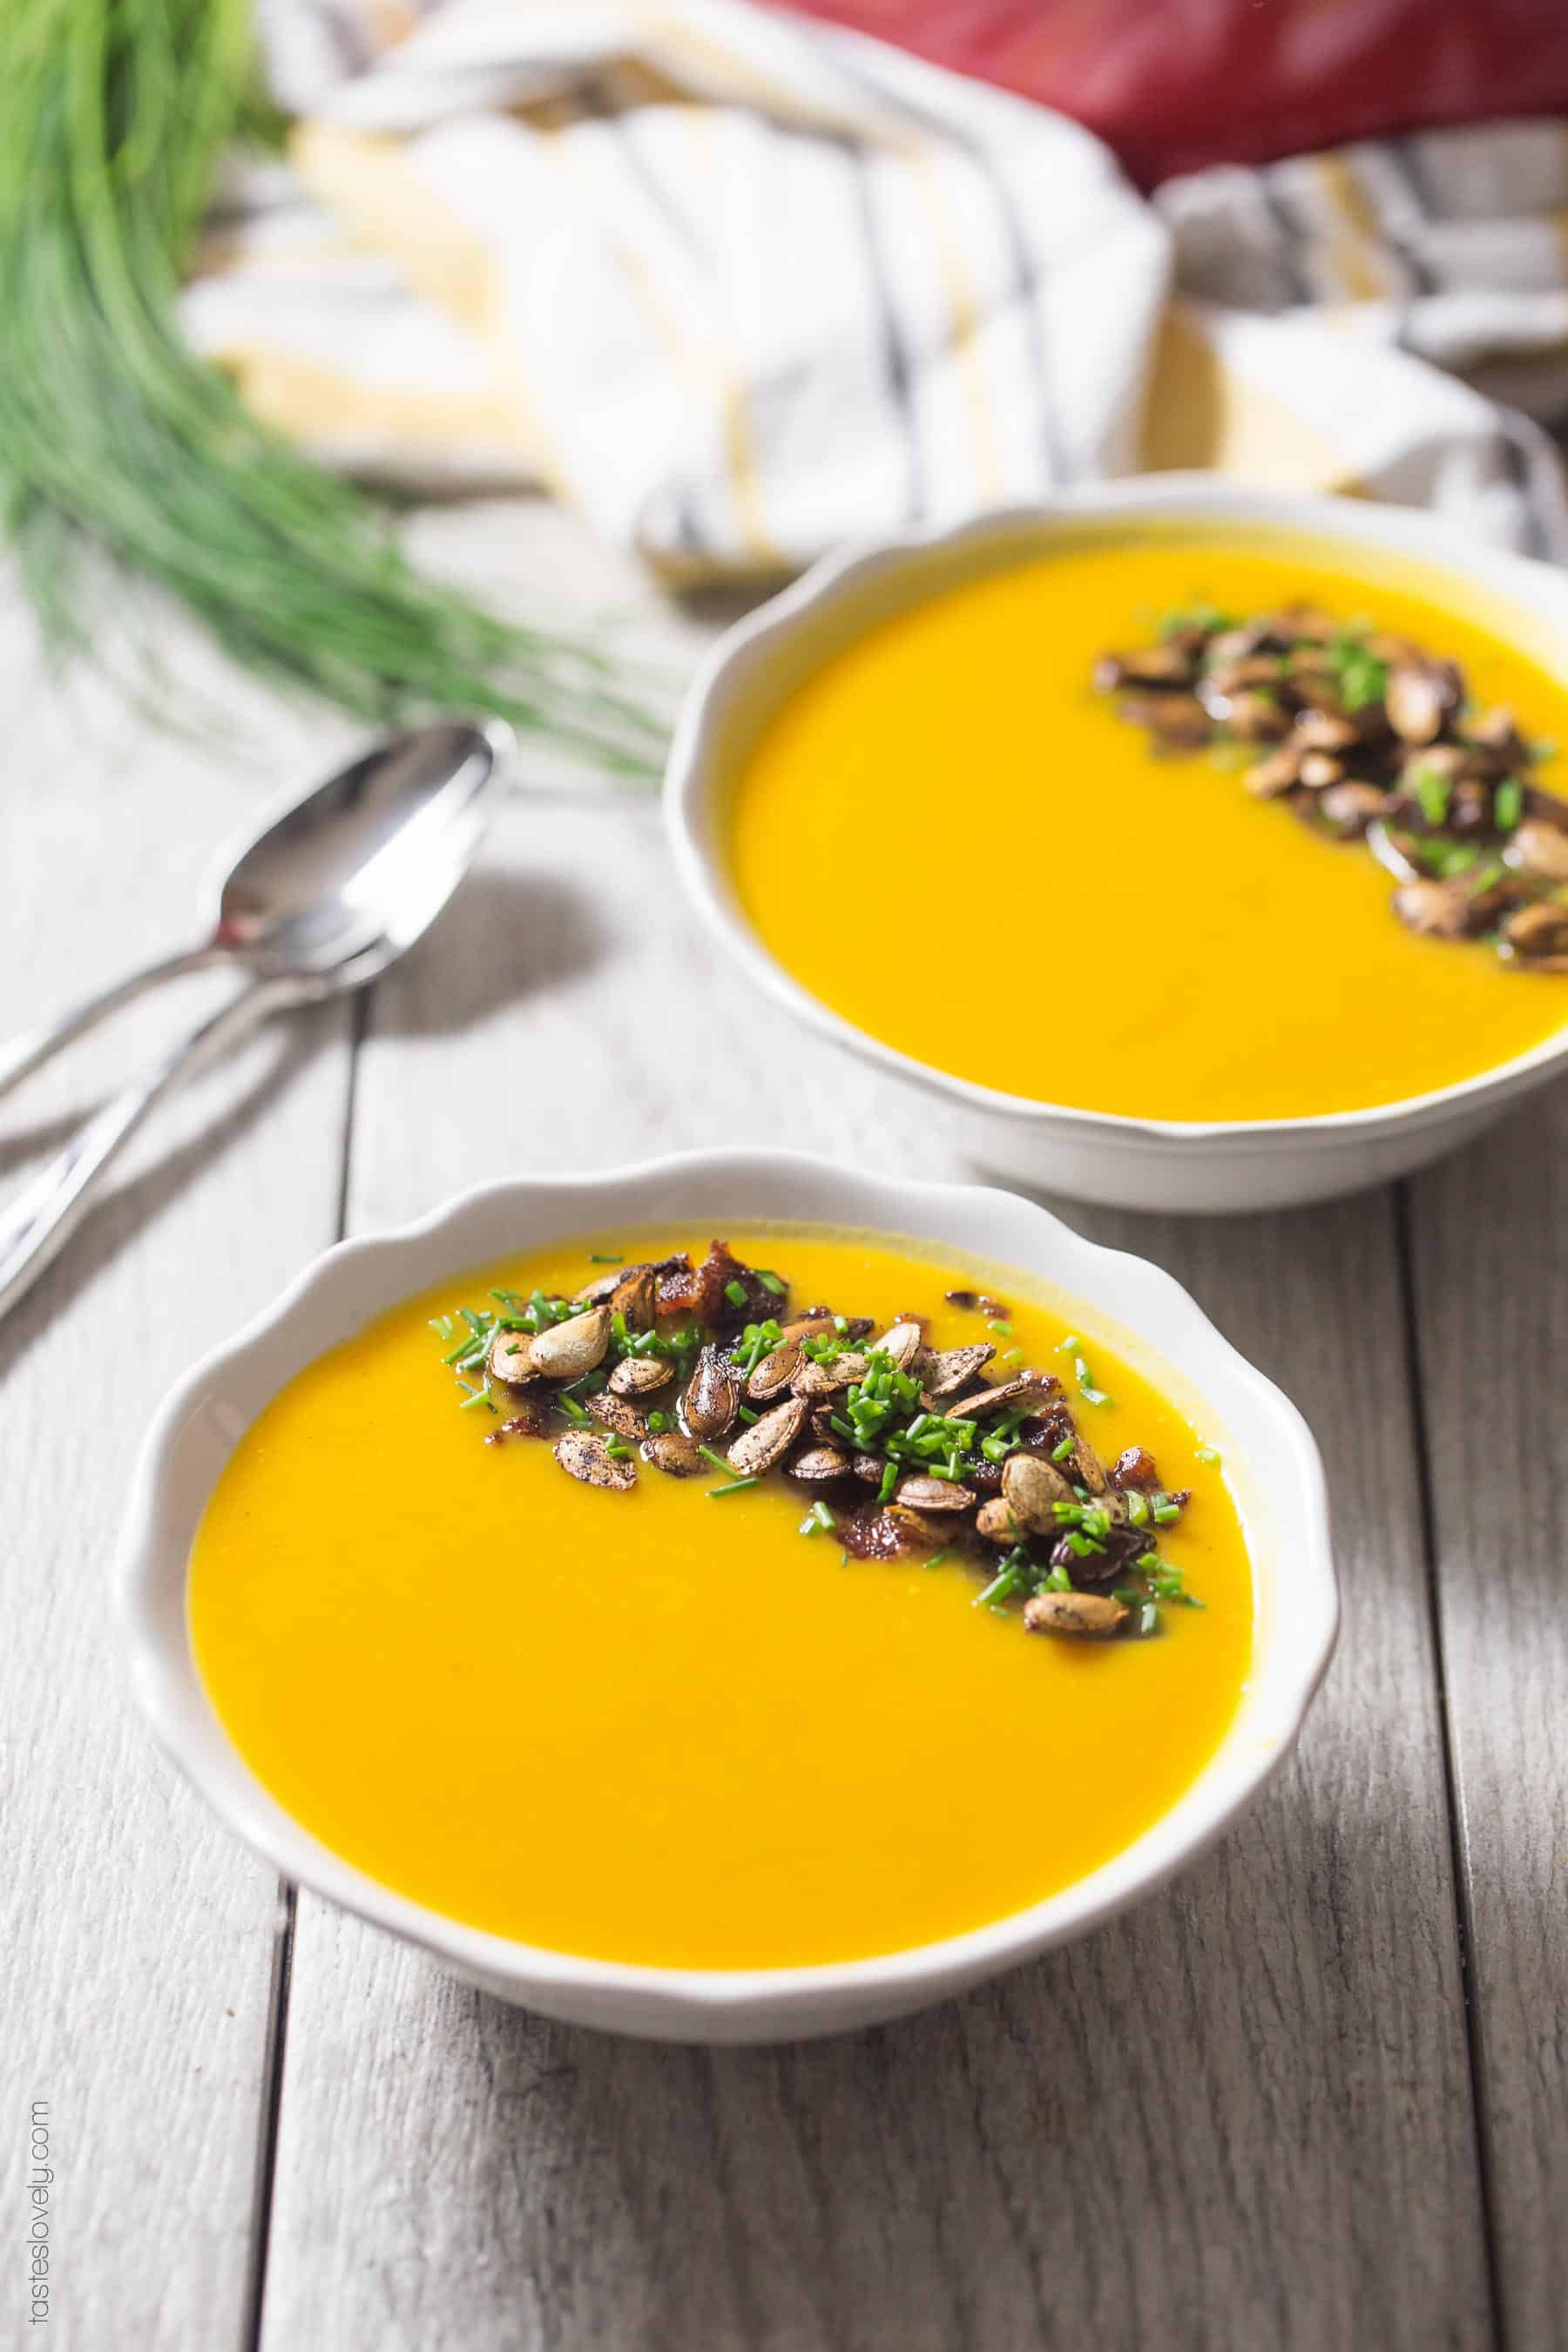 Paleo Roasted Butternut Squash Soup - the oven and your blender does all the work for you! Dairy free, gluten free, Whole30